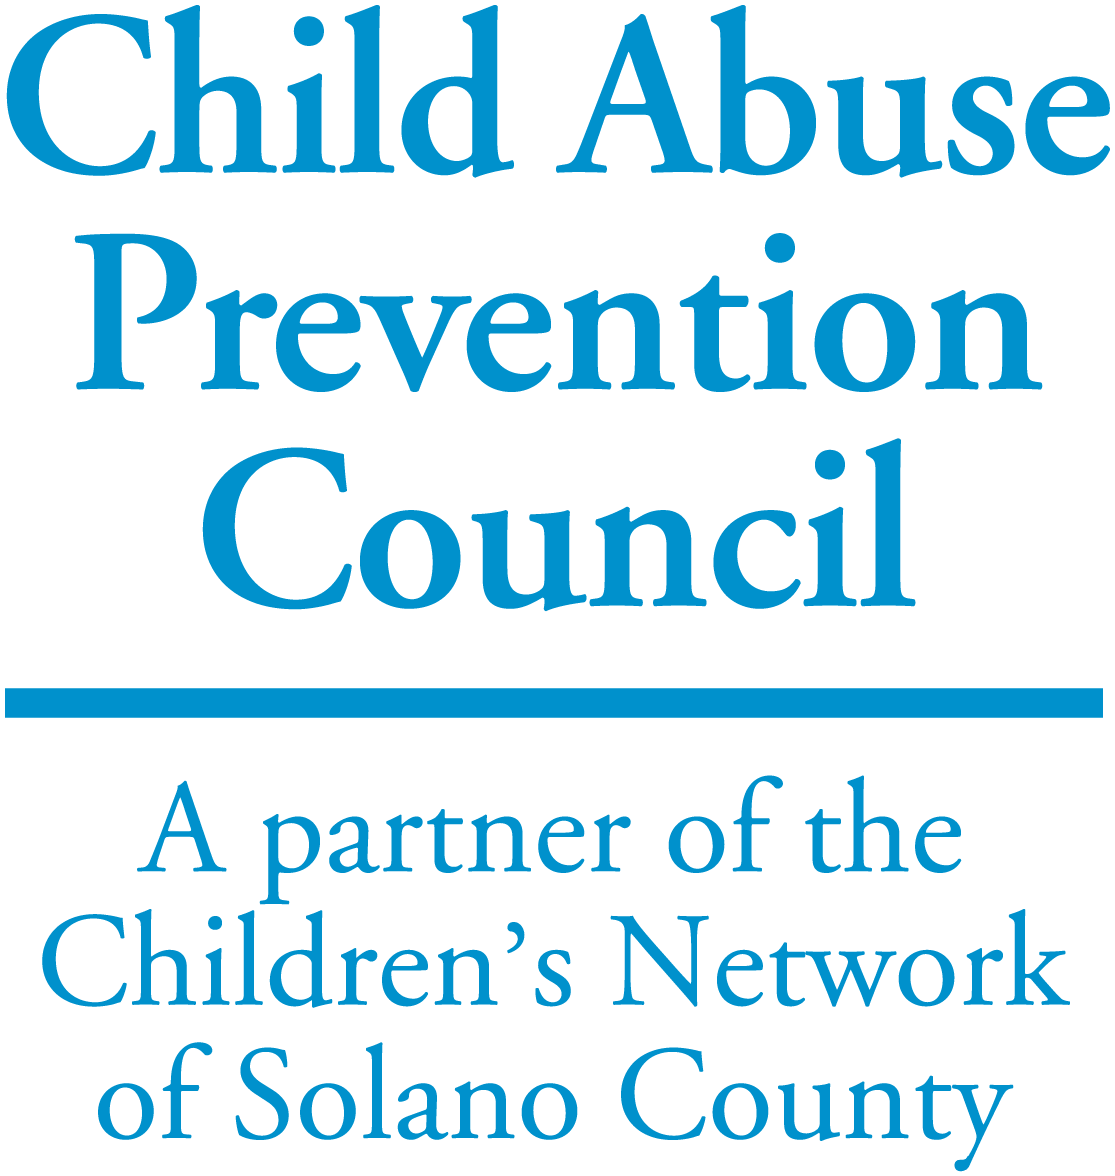 Graphic with text reading “Child Abuse Prevention Council, A partner of Children’s Network of Solano County”.